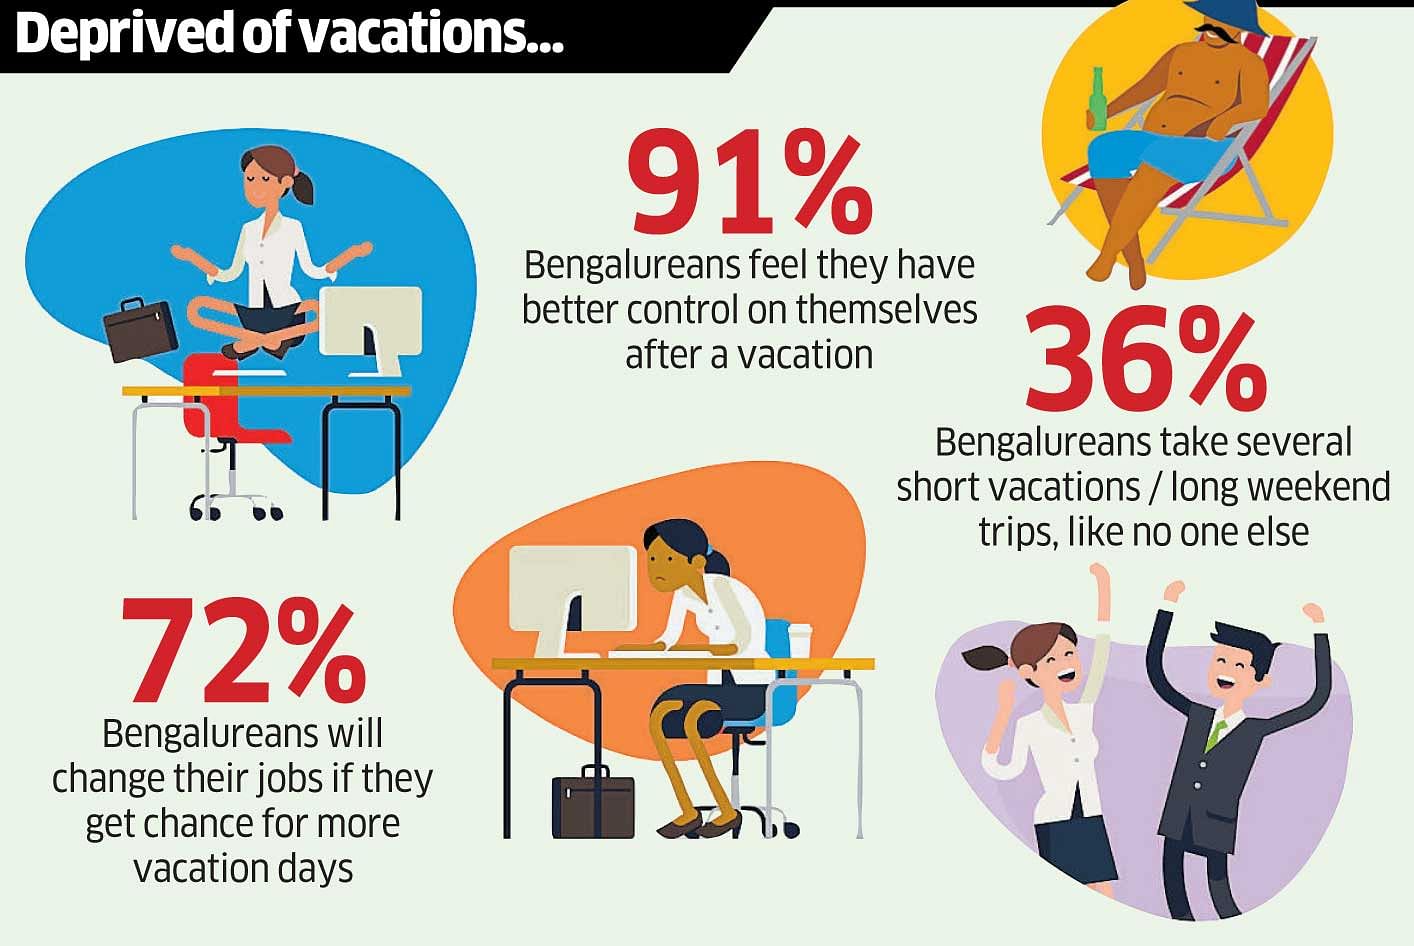 Most Bengalureans get only 1- 10 days of vacations days and majority of them take fewer vacations (51%). Forty per cent feel that they deserve six to 10 more vacation days. (DH inforgraphics)